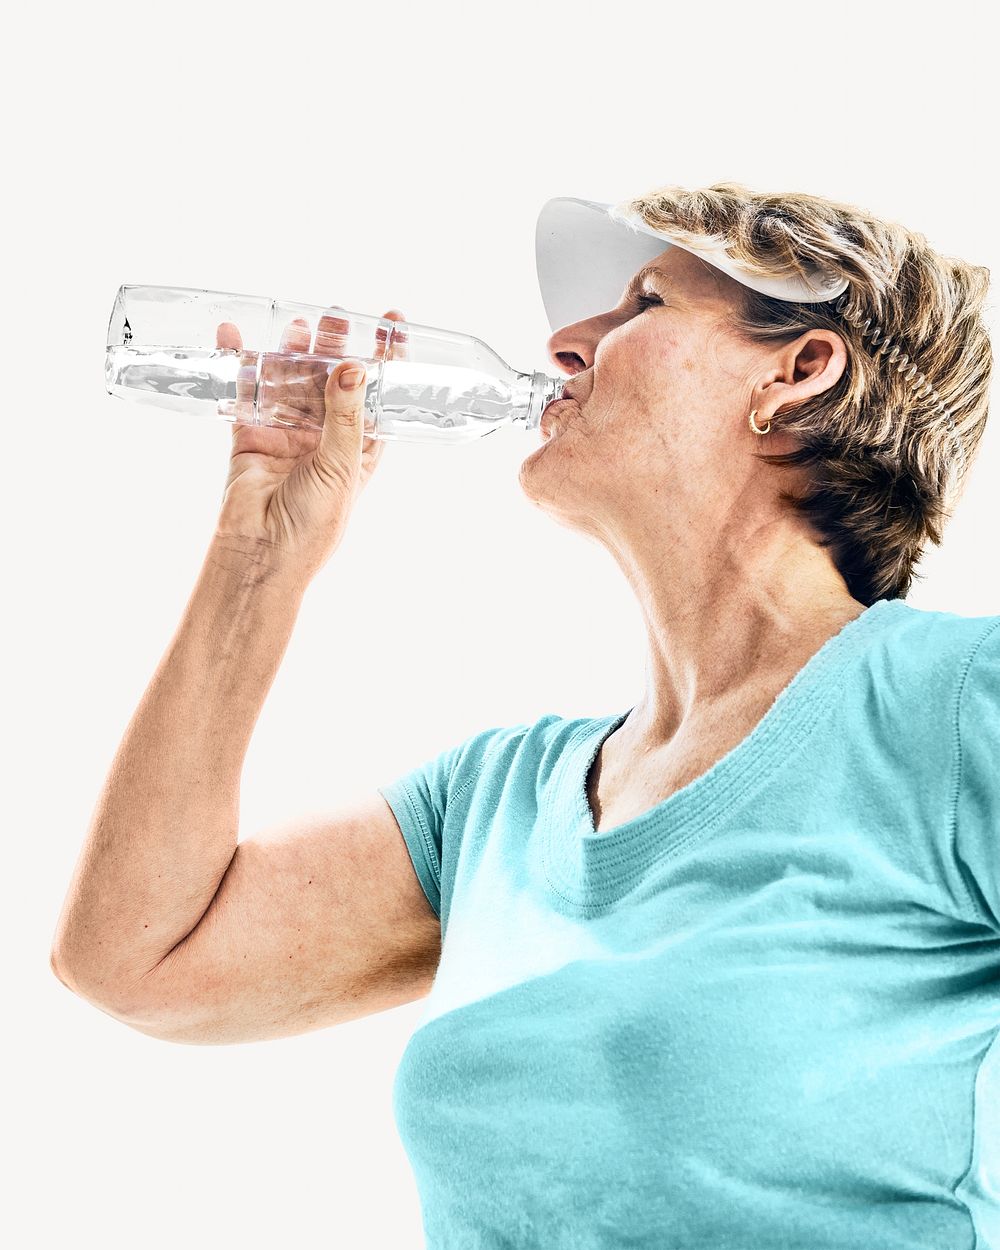 Senior woman drinking water after an exercise image element